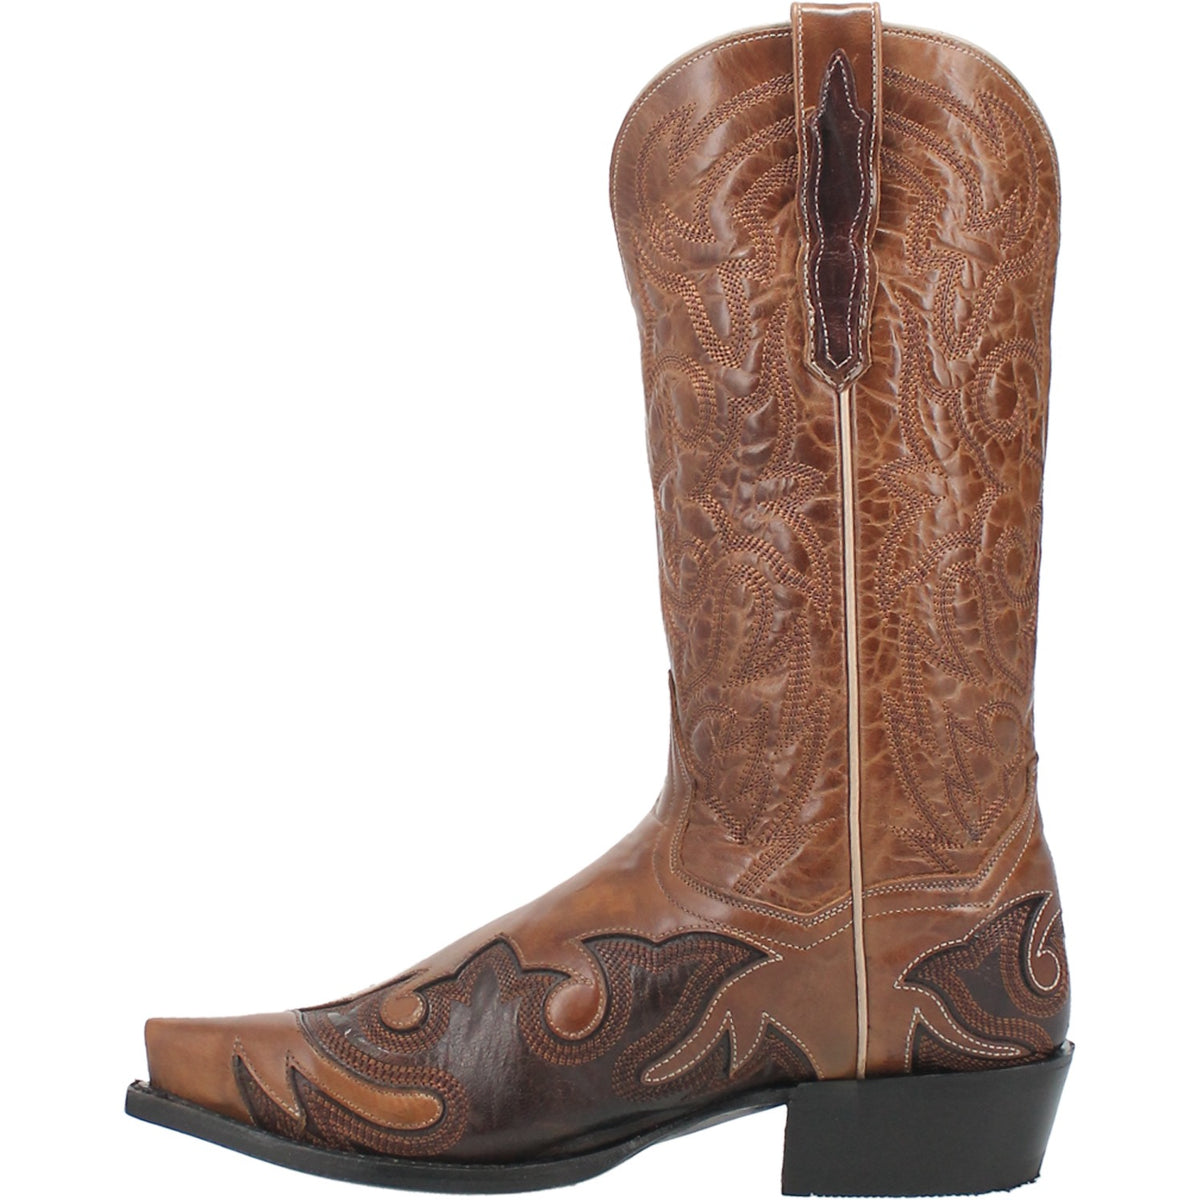 HONKY TONK LEATHER BOOT Cover